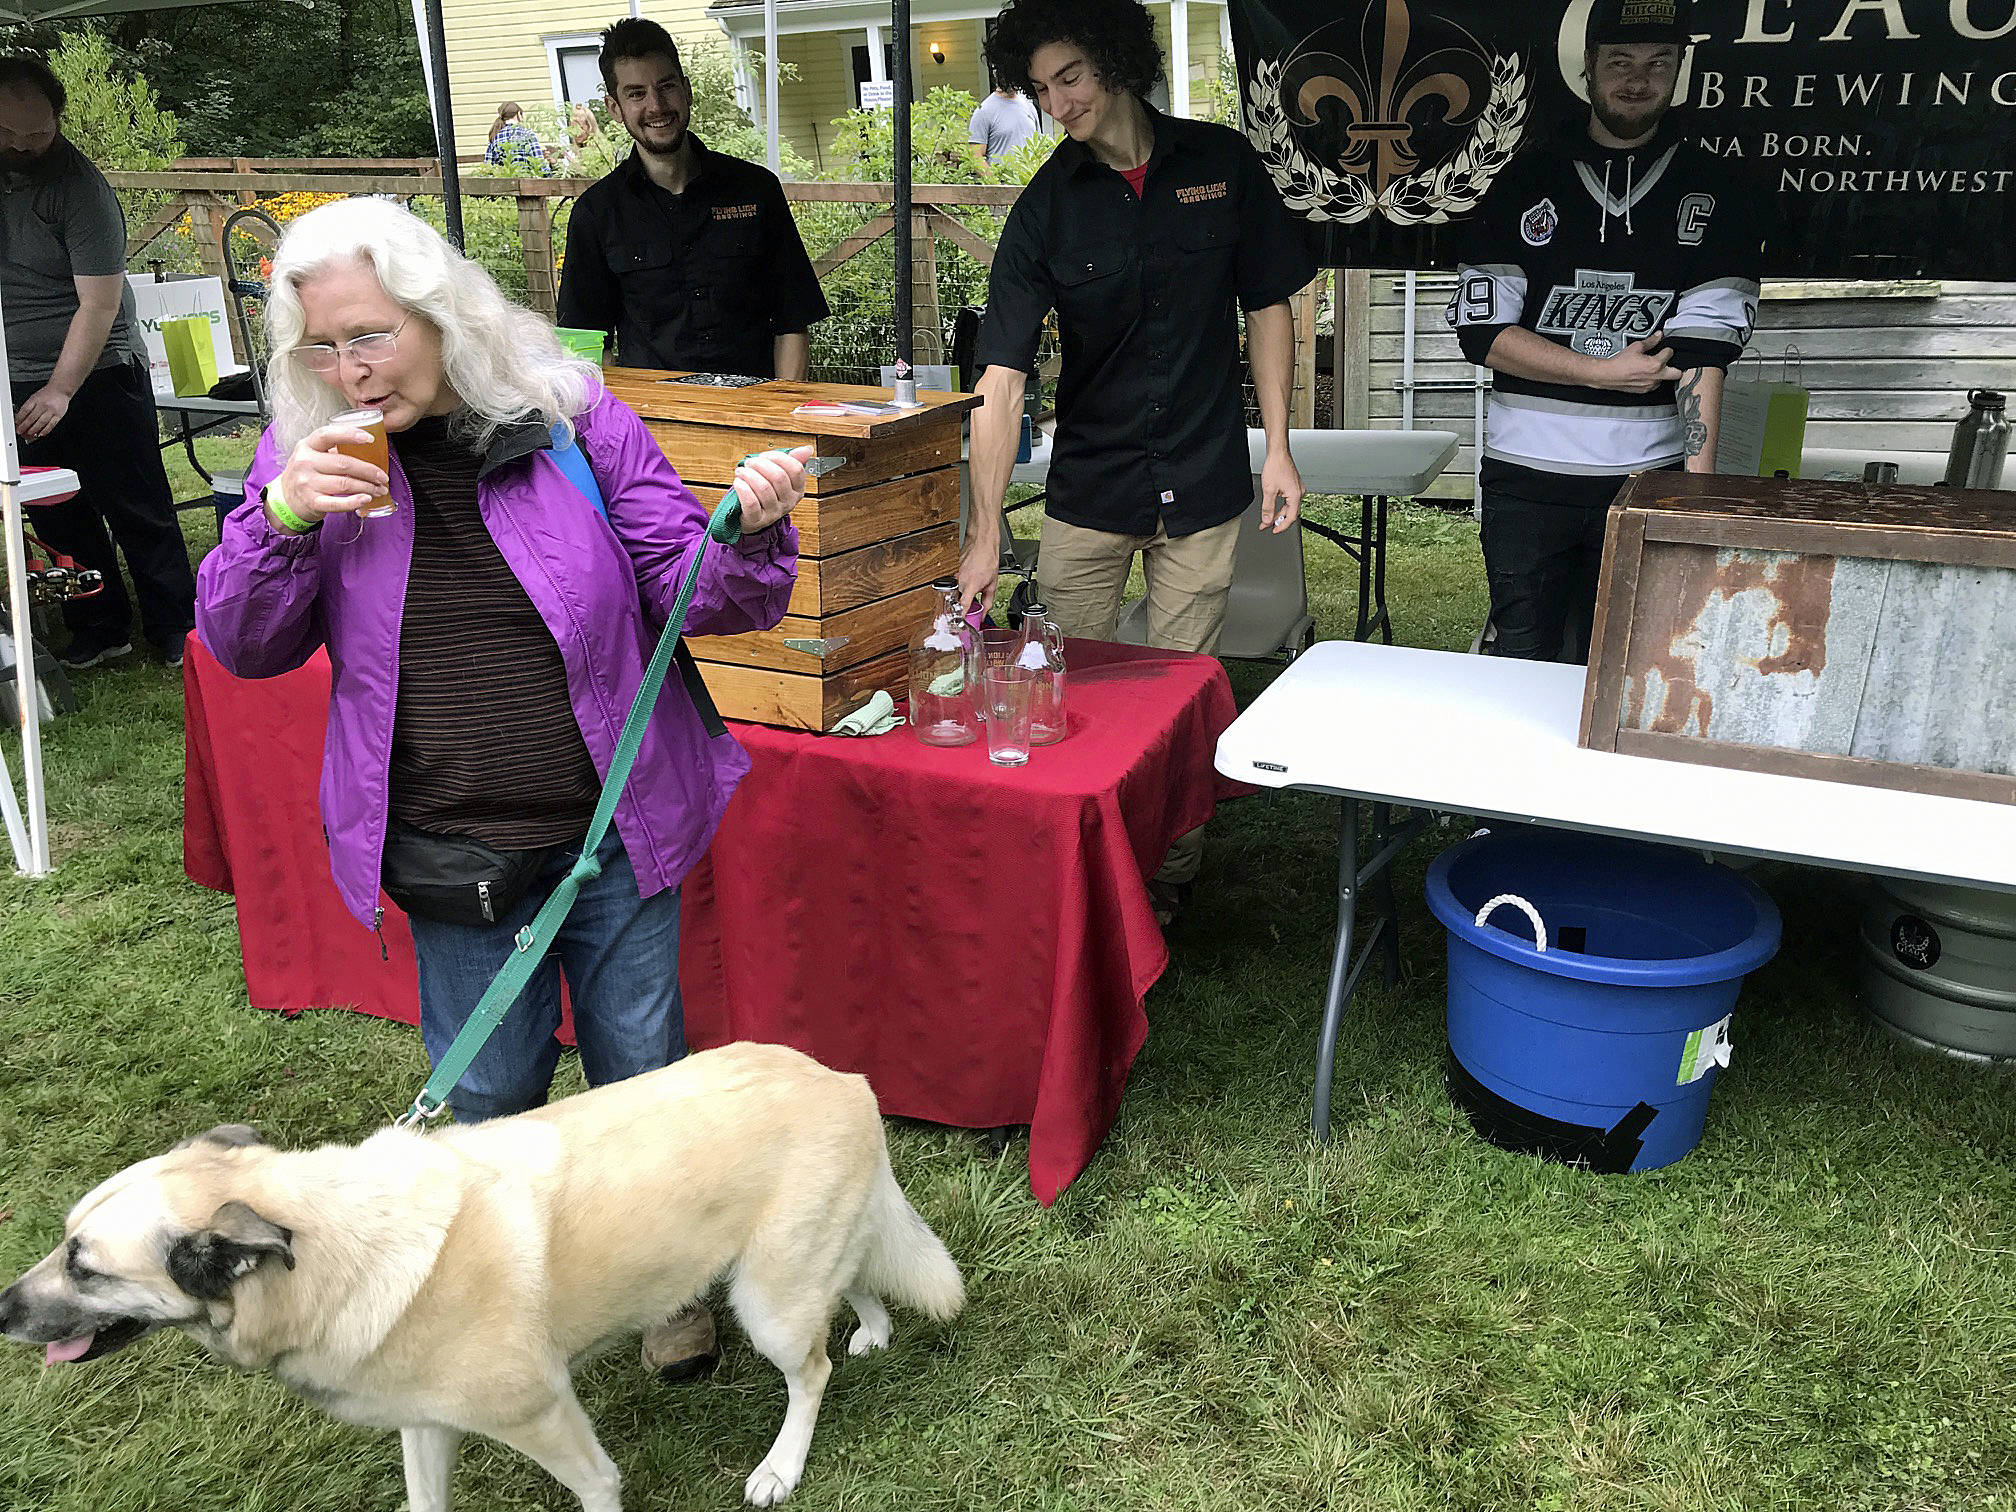 Auburn’s Geaux Brewing serves up a fresh, on-tap beer to a customer during the Hops & Crops Music and Beer Festival at Mary Olson Farm last Saturday. MARK KLAAS, Auburn Reporter